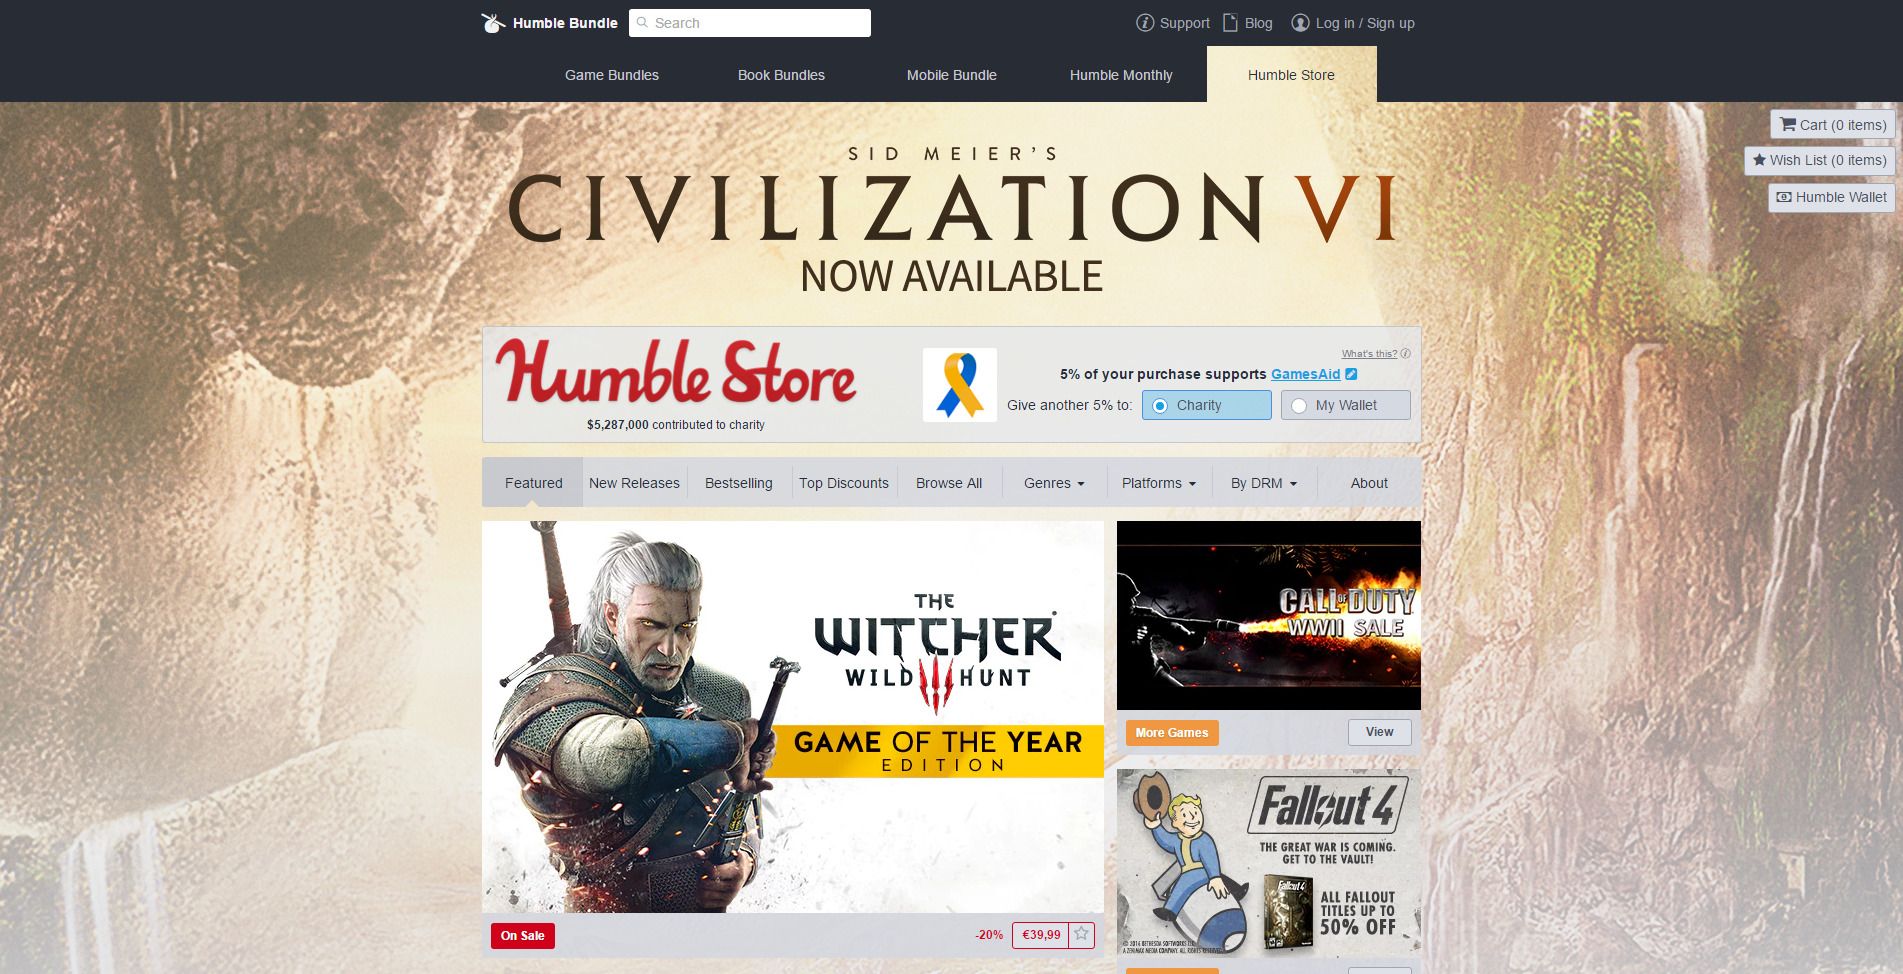 9 Steam Alternatives - Sites Like Steam To Buy PC Games Online - HubPages